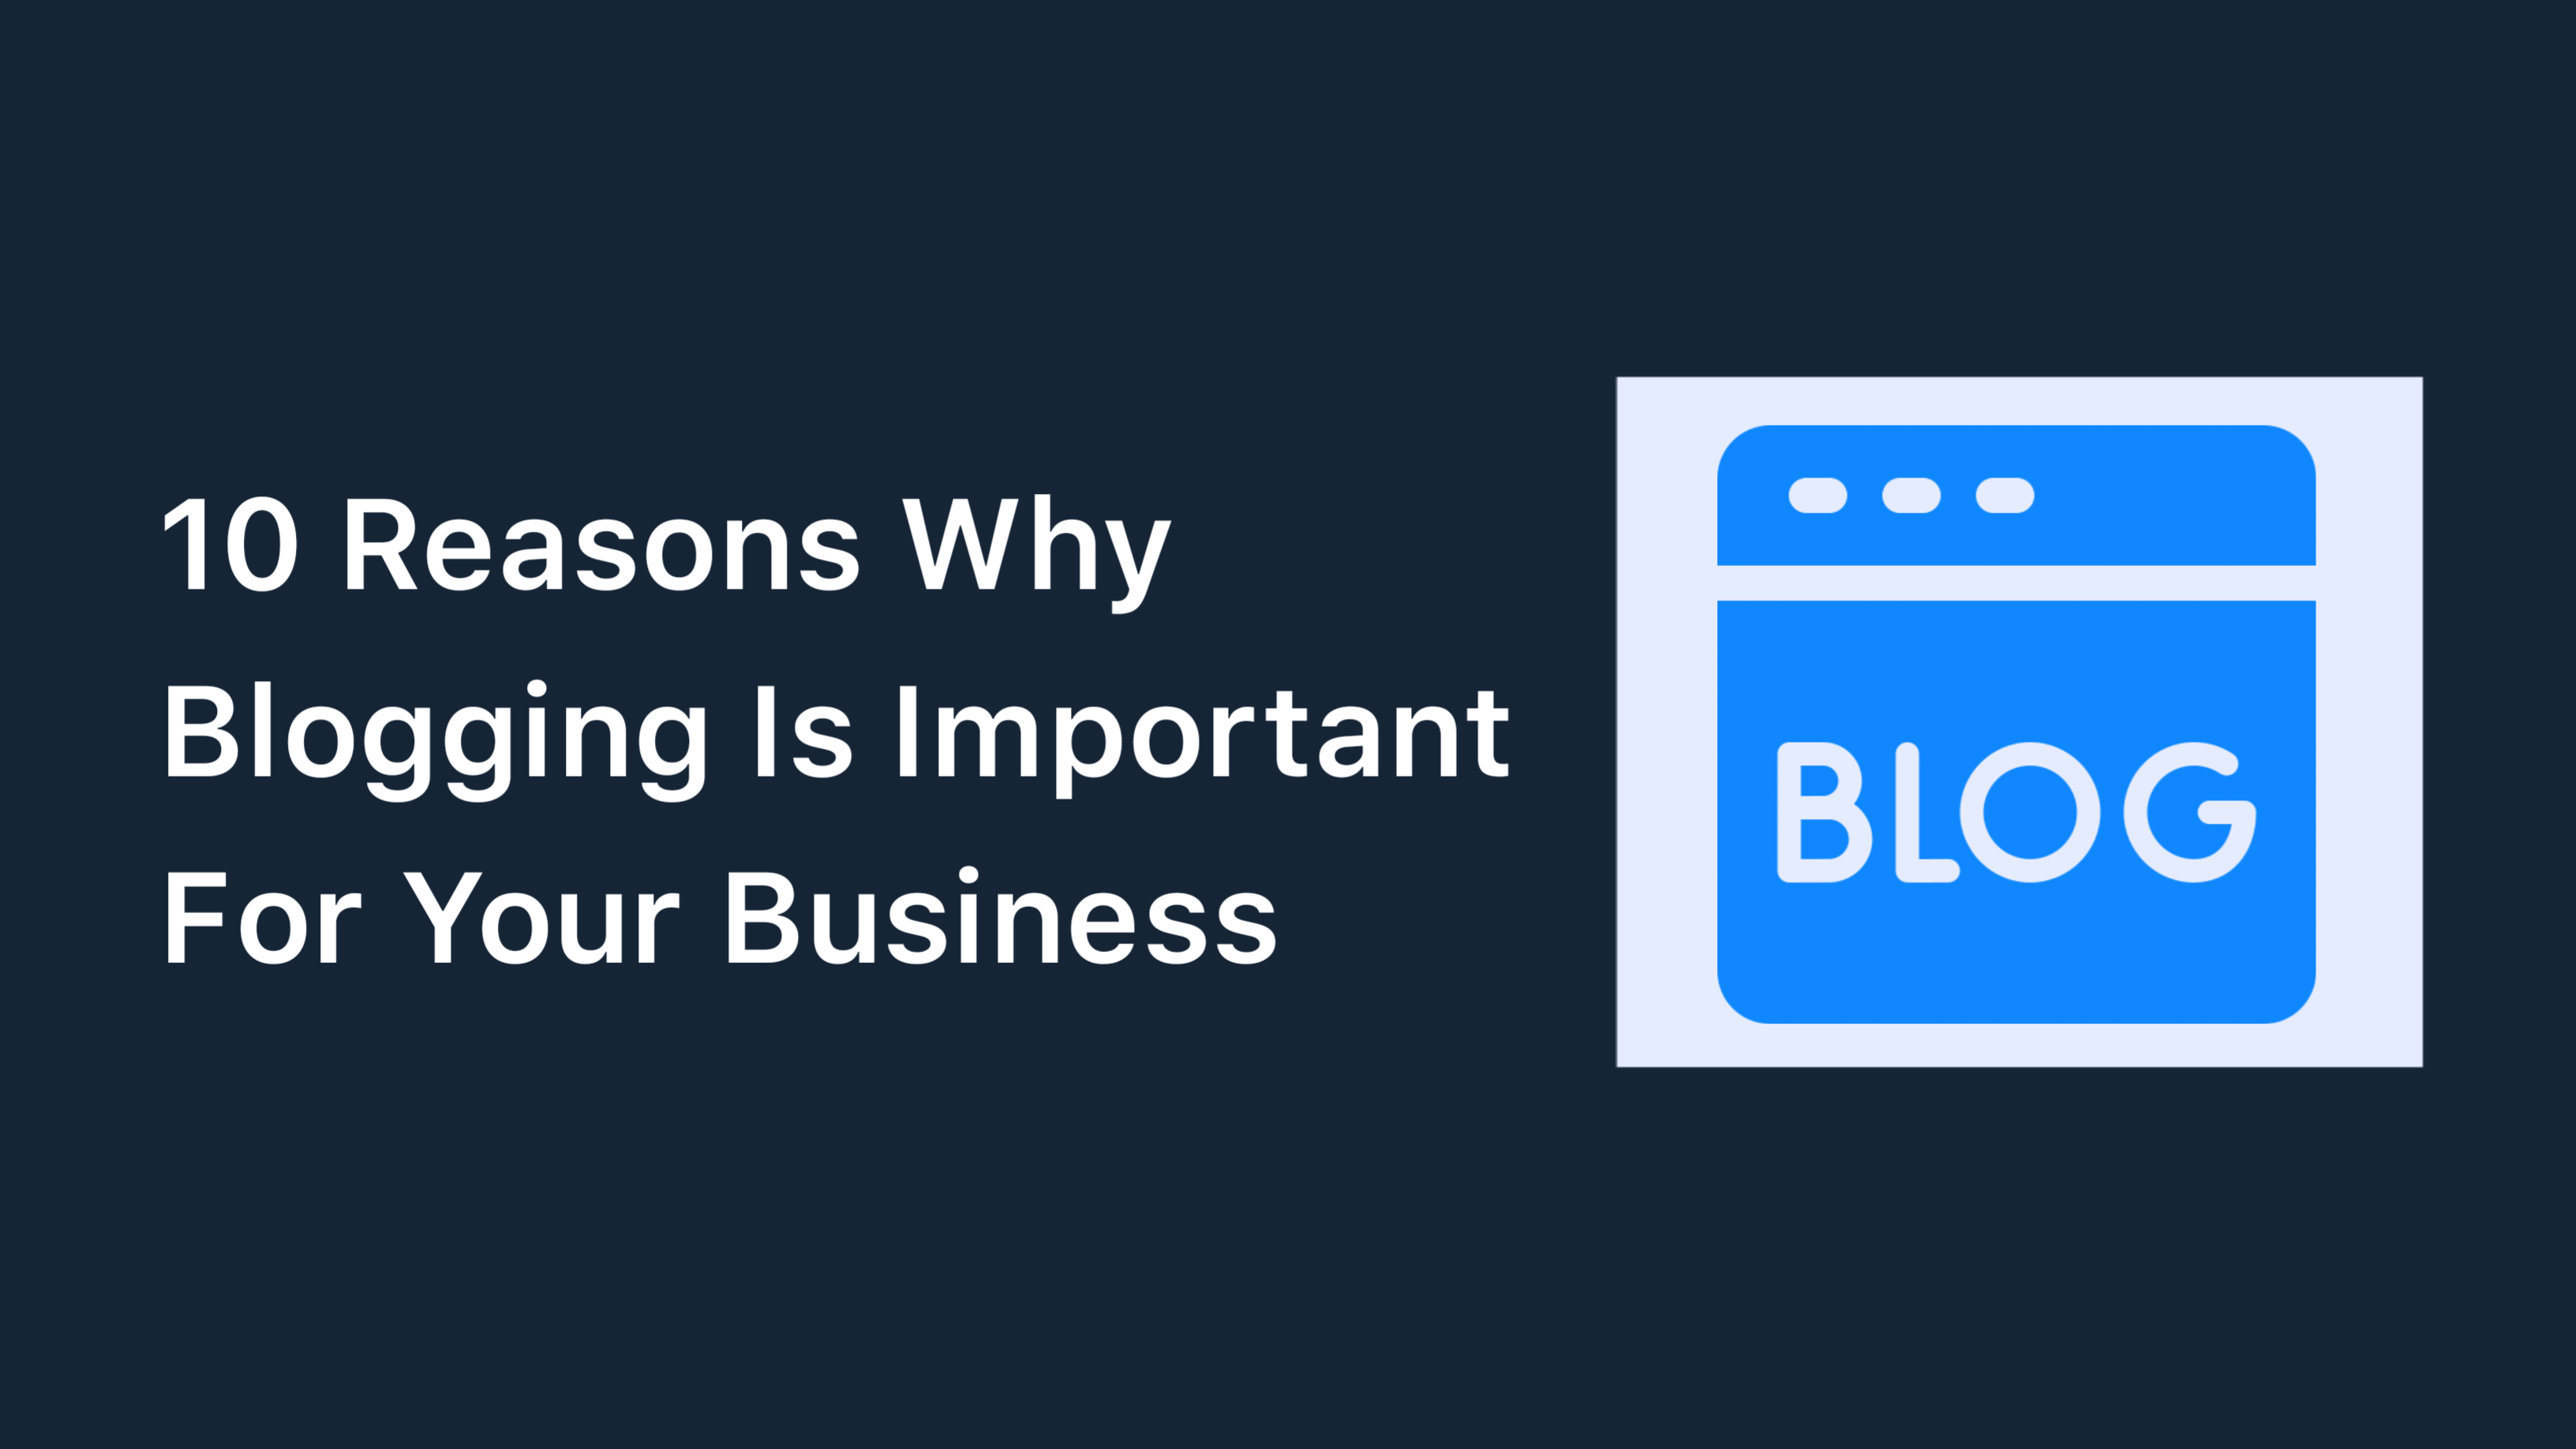 10 Reasons Why Blogging Is Important For Your Business